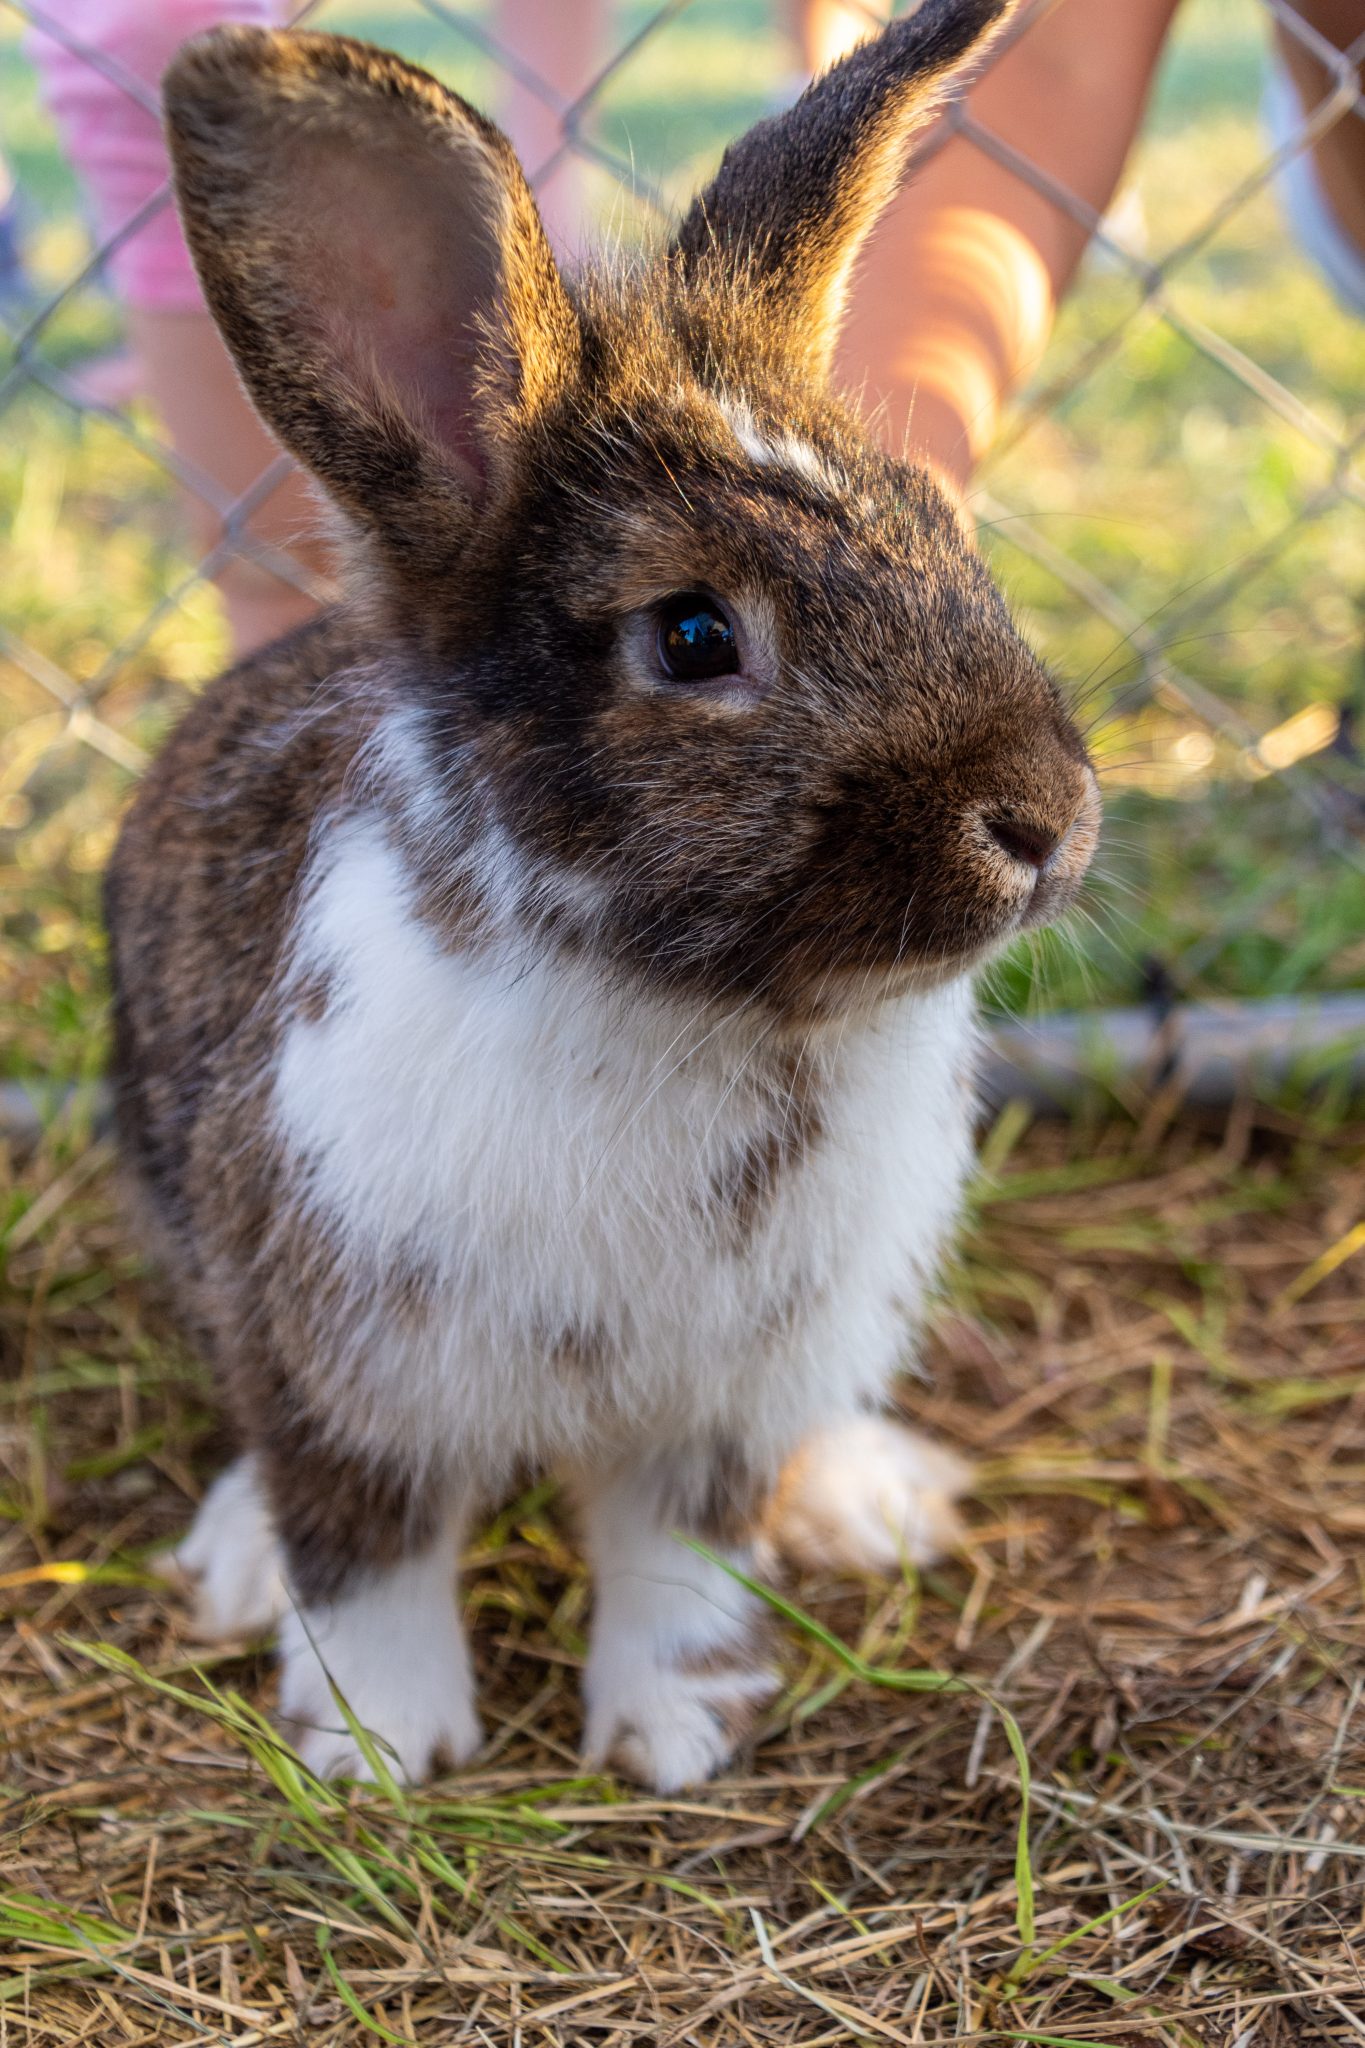 Brown and white rabbit in a petting zoo